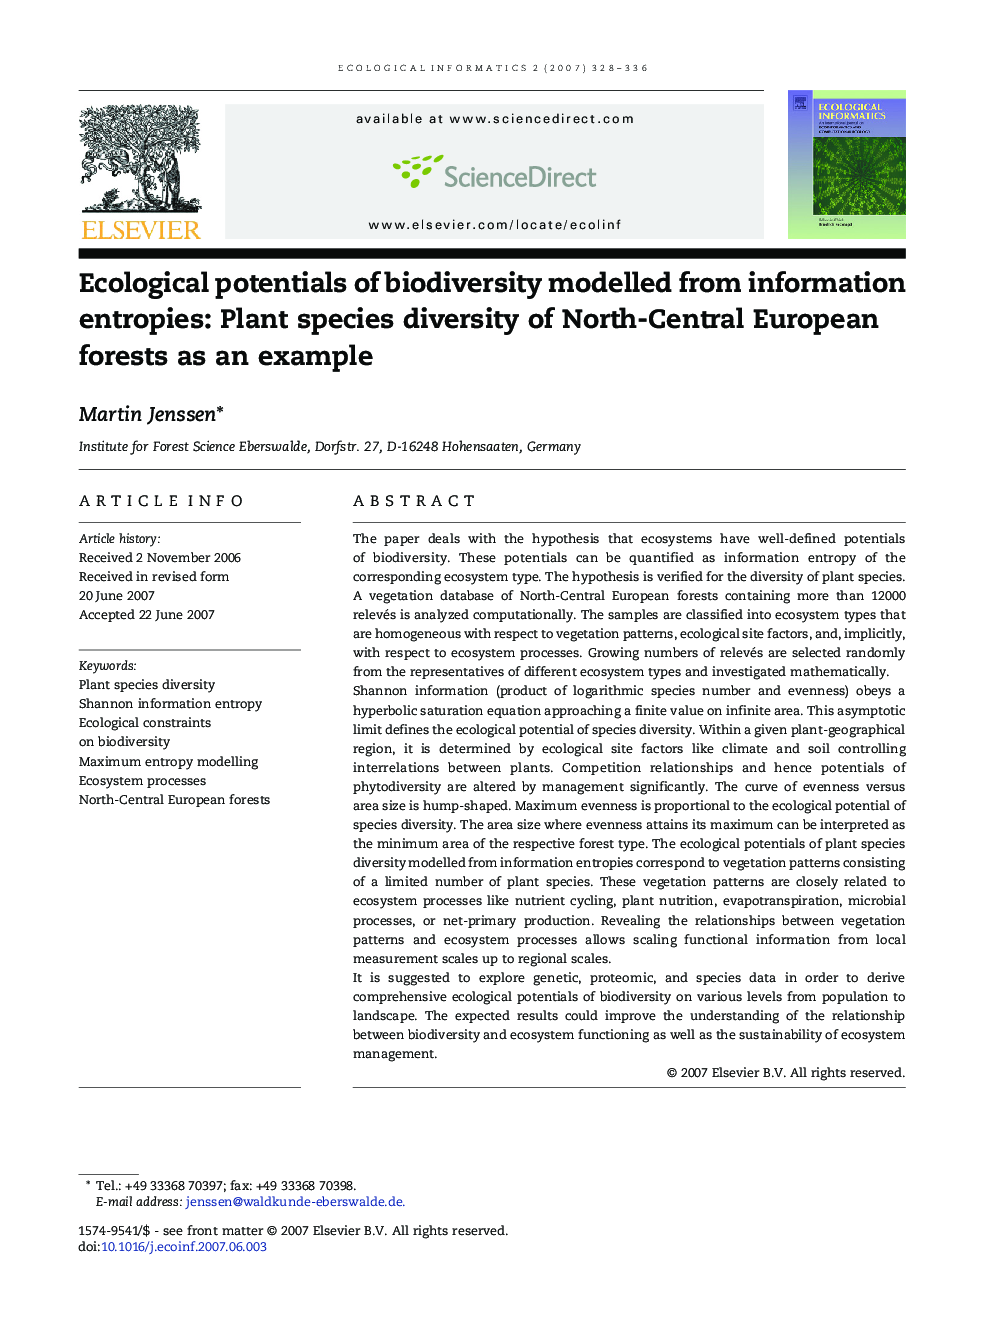 Ecological potentials of biodiversity modelled from information entropies: Plant species diversity of North-Central European forests as an example